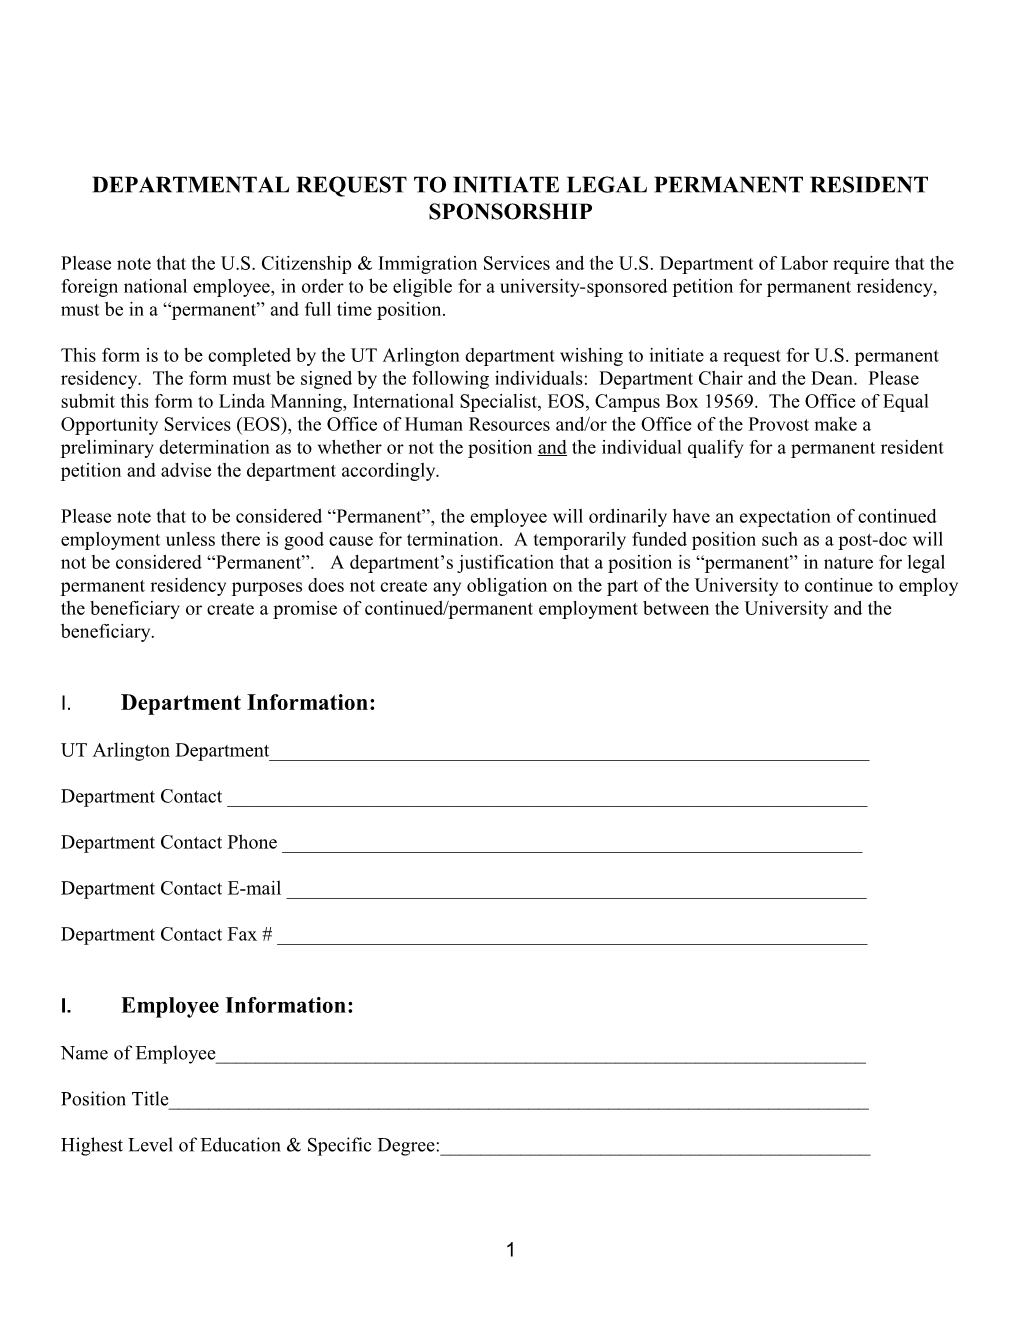 Initiation of Permanent Residency Process